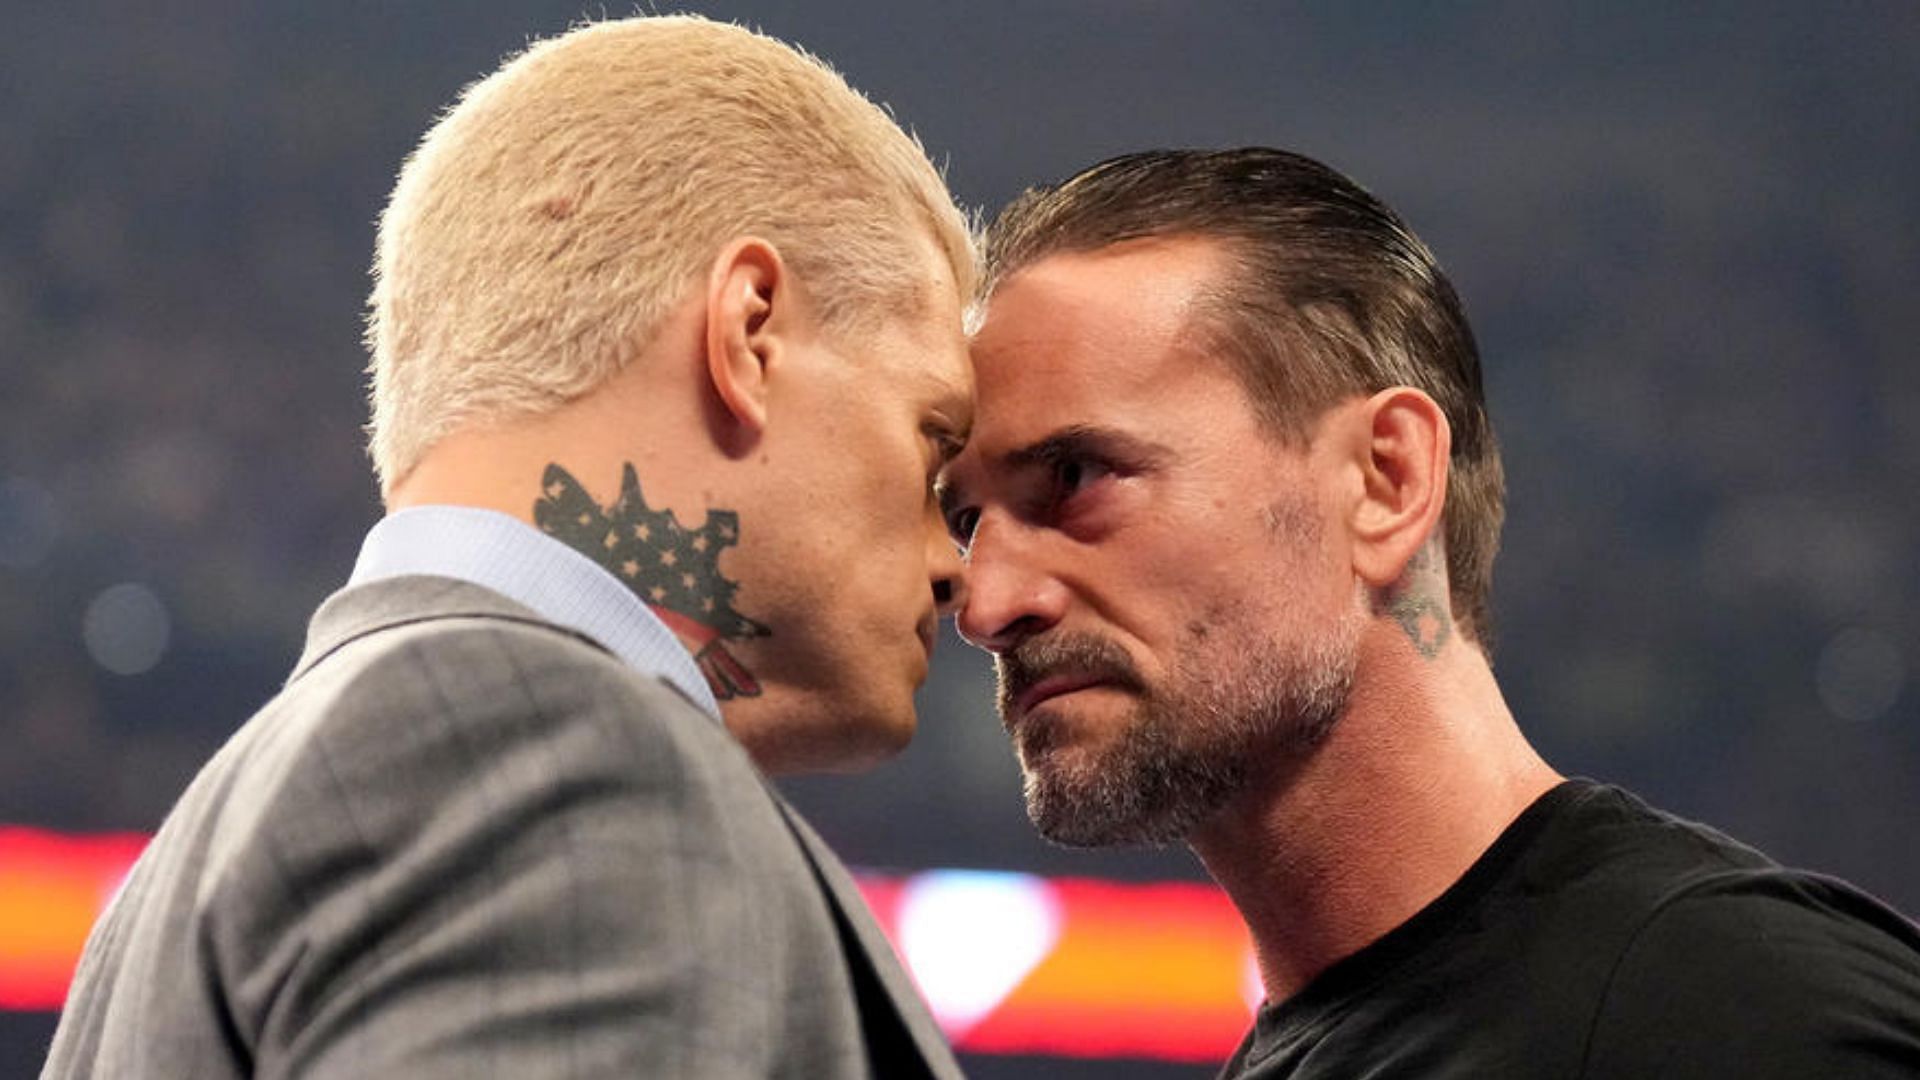 Punk and Rhodes met face-to-face on RAW.